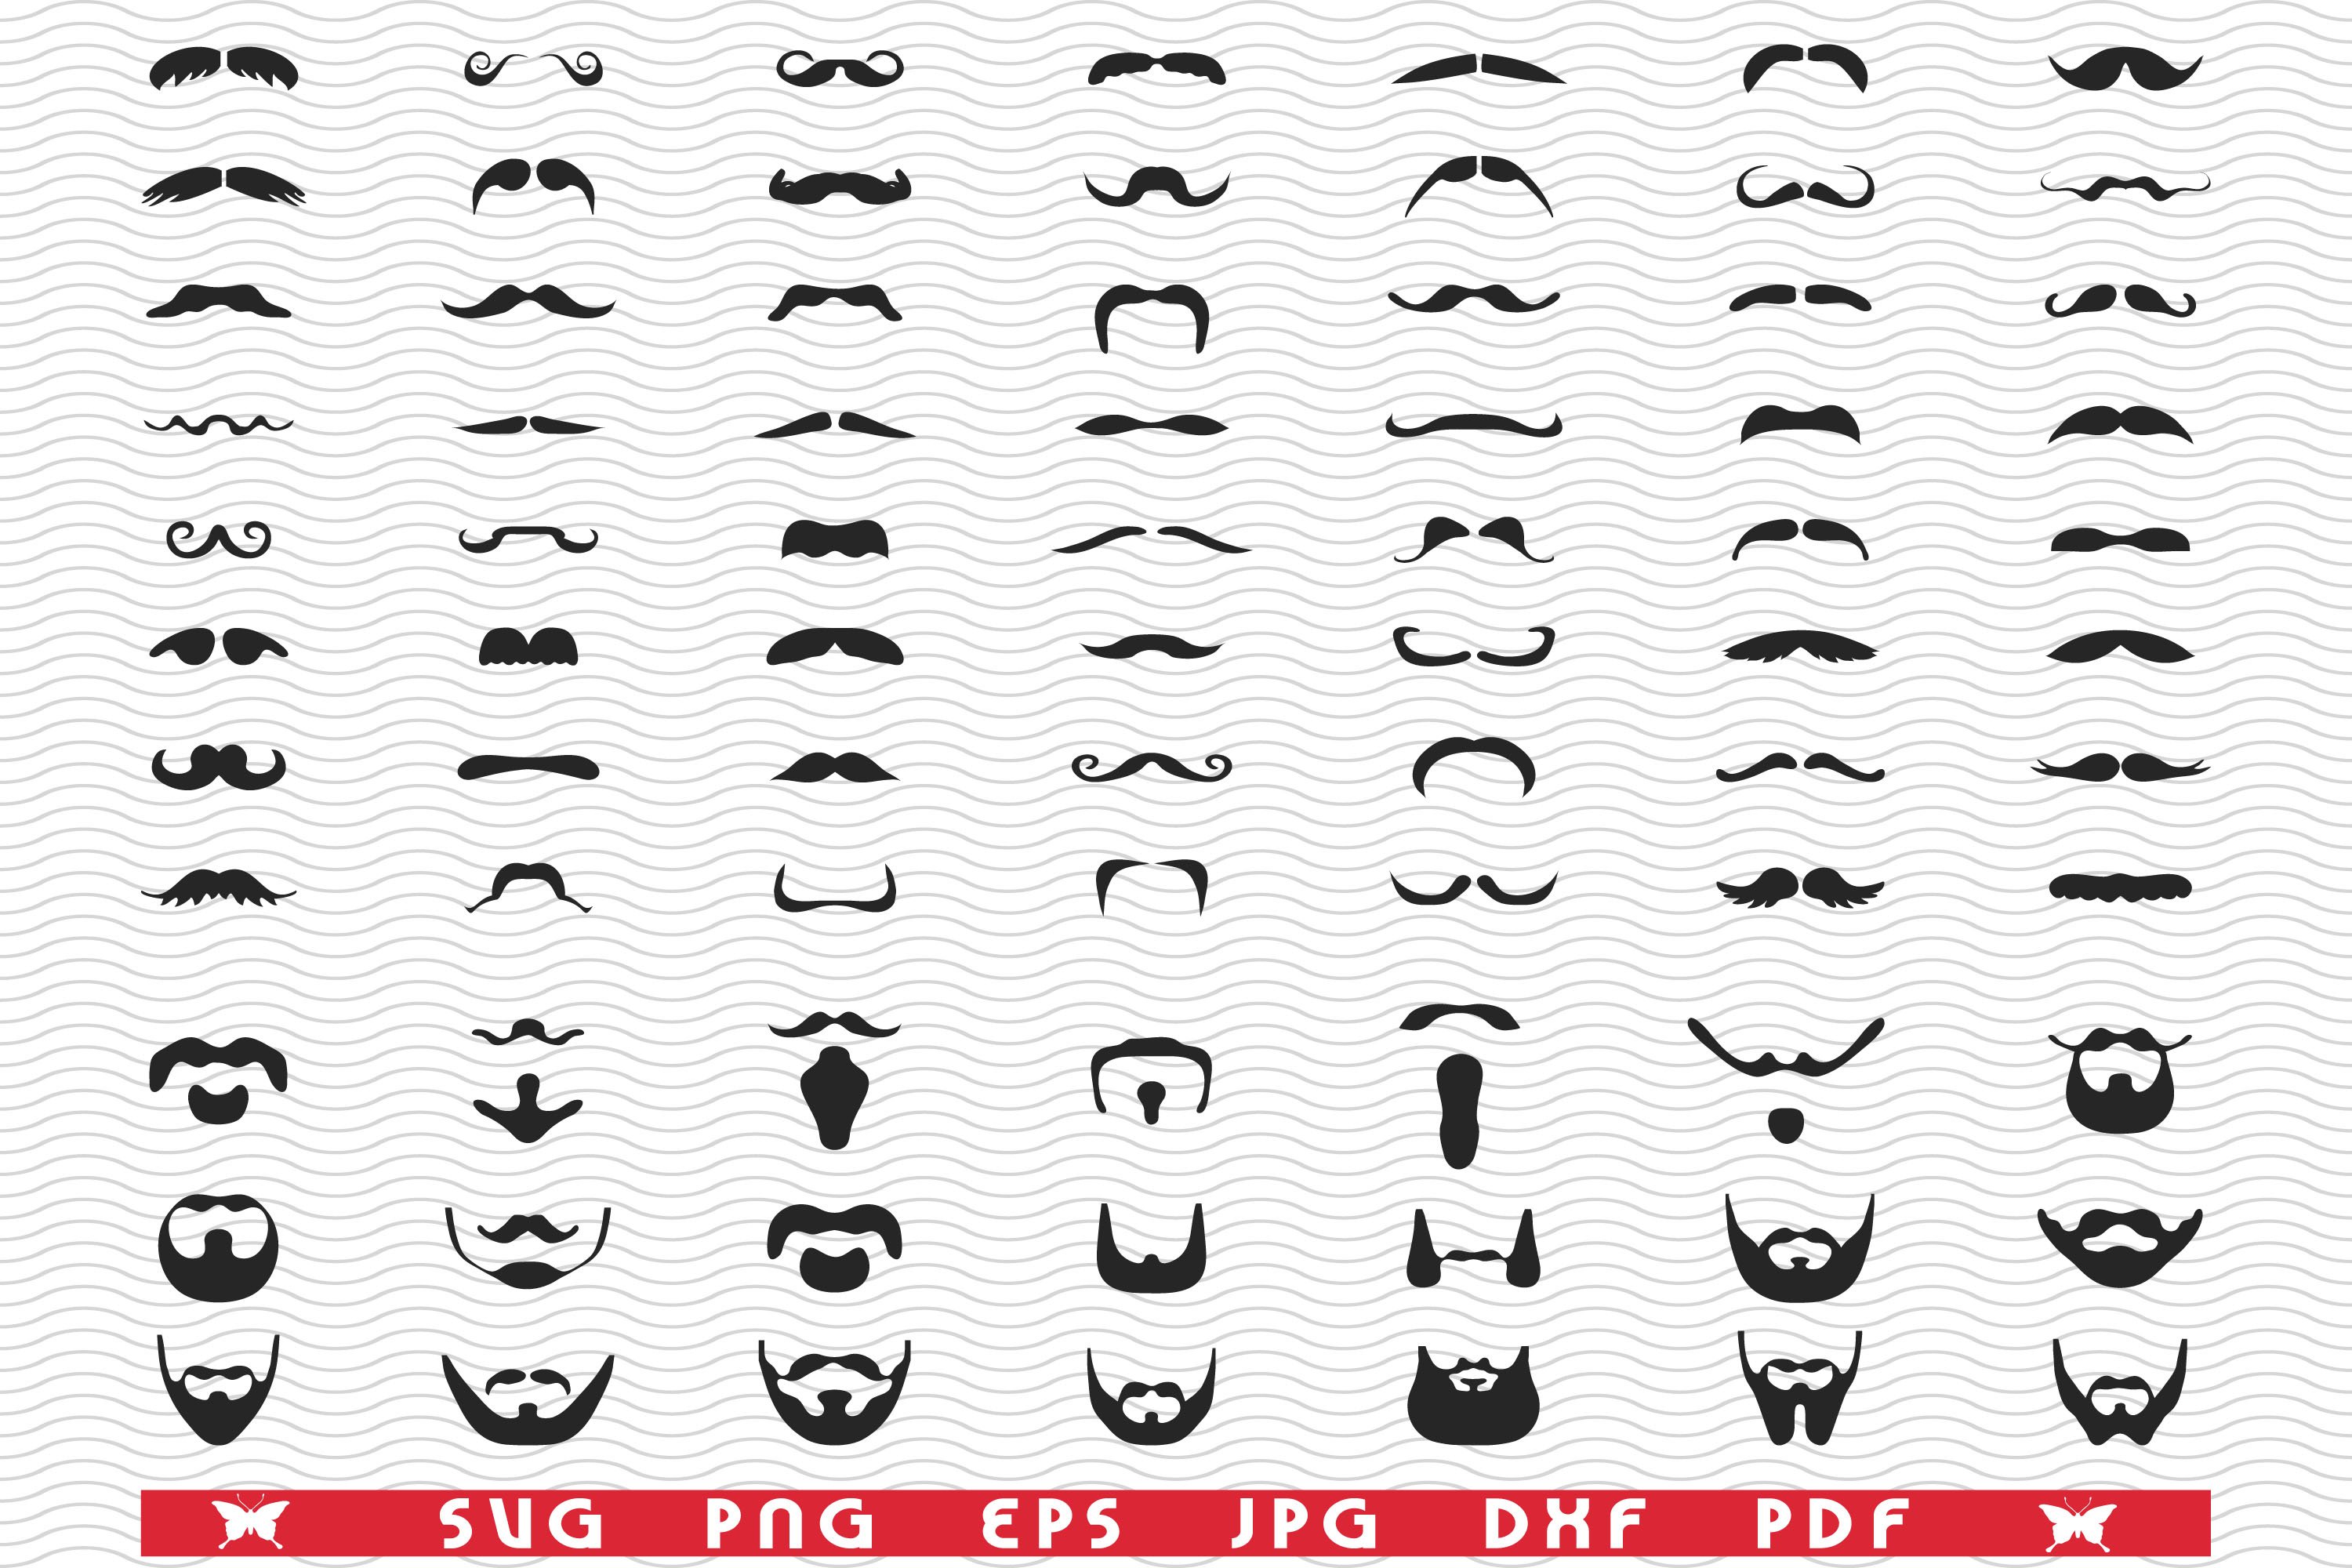 SVG Beard, Moustache, Silhouettes cover image.